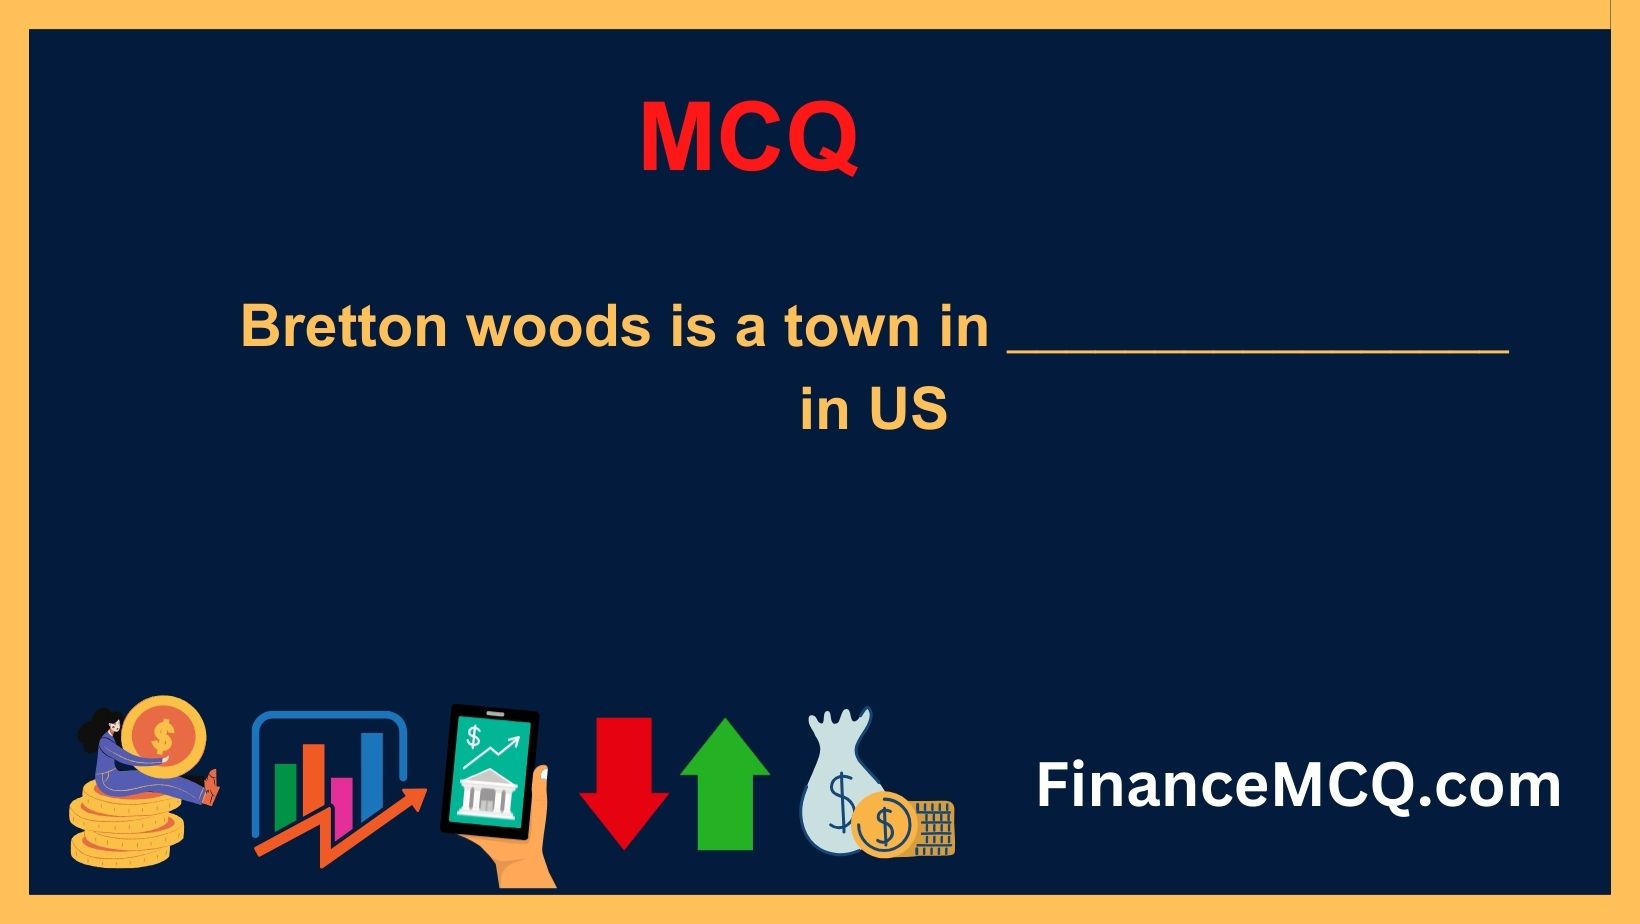 Bretton woods is a town in _________________ in US